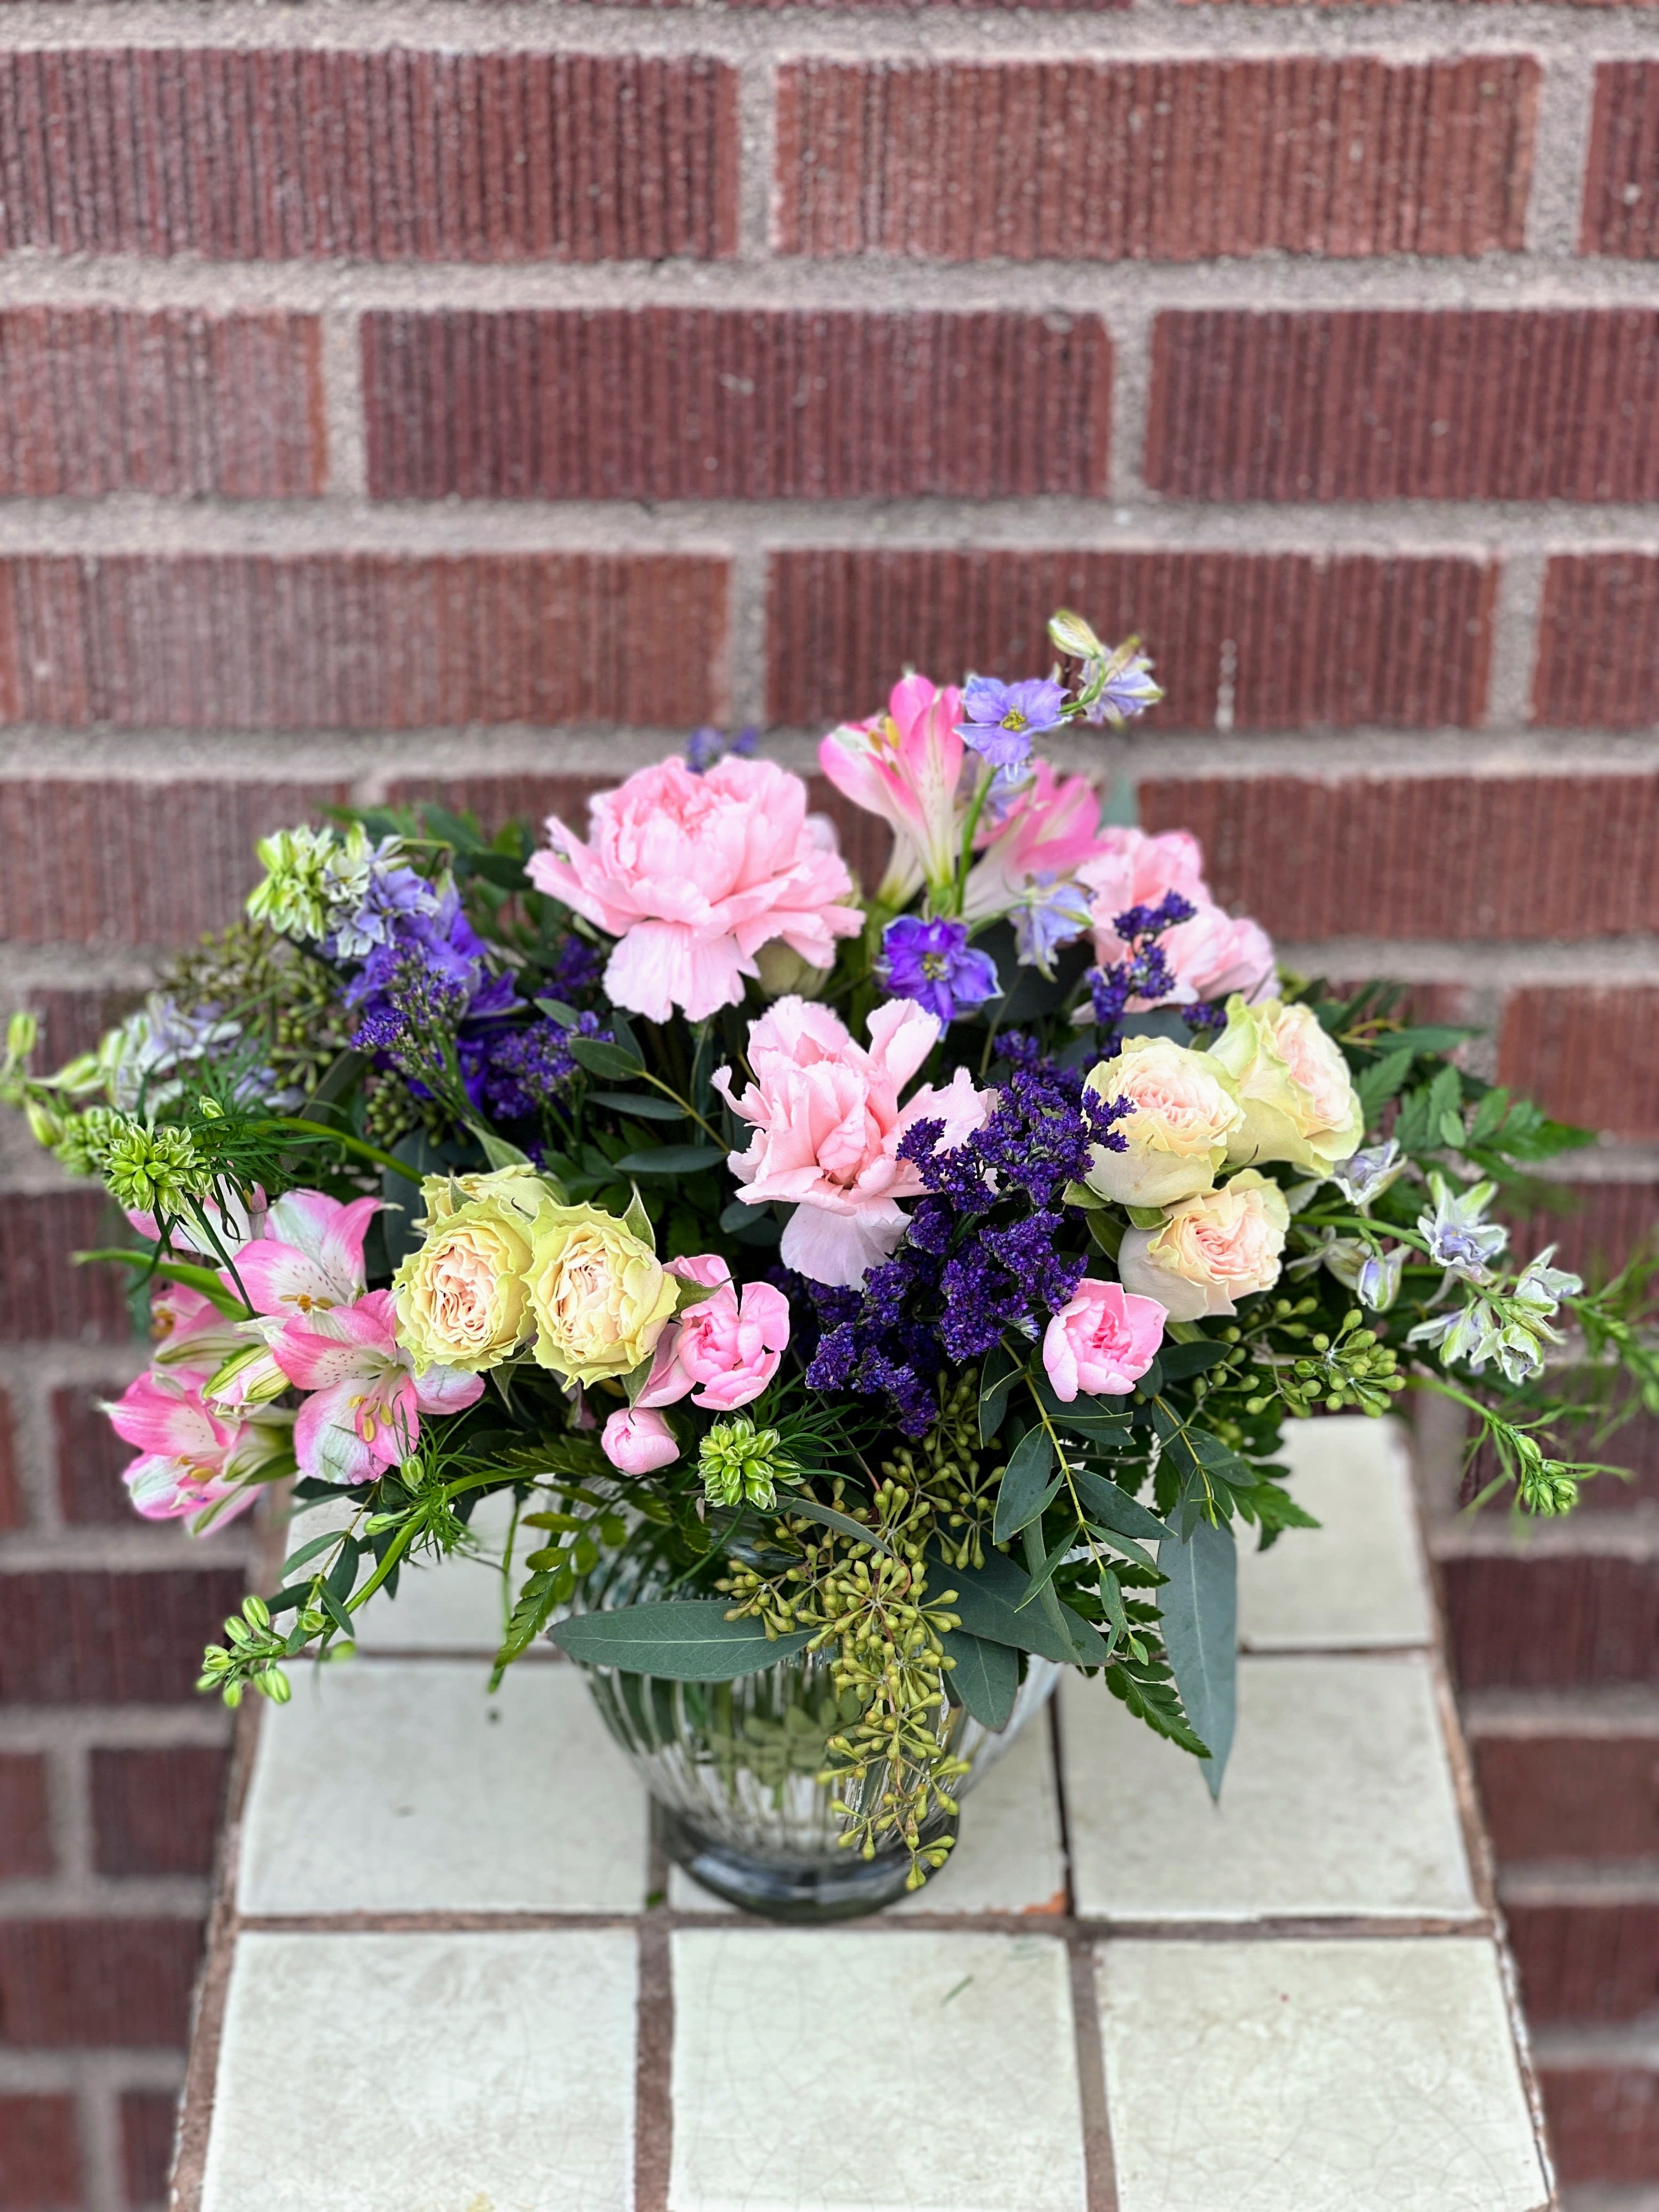 Pretty Pastel - Oh so soft and divinely delicate, this perfect pastel bouquet is pretty as can be. Delivered in a classic ginger jar, the graceful arrangement of alstroemeria, carnations and stock is a welcome surprise on any occasion.